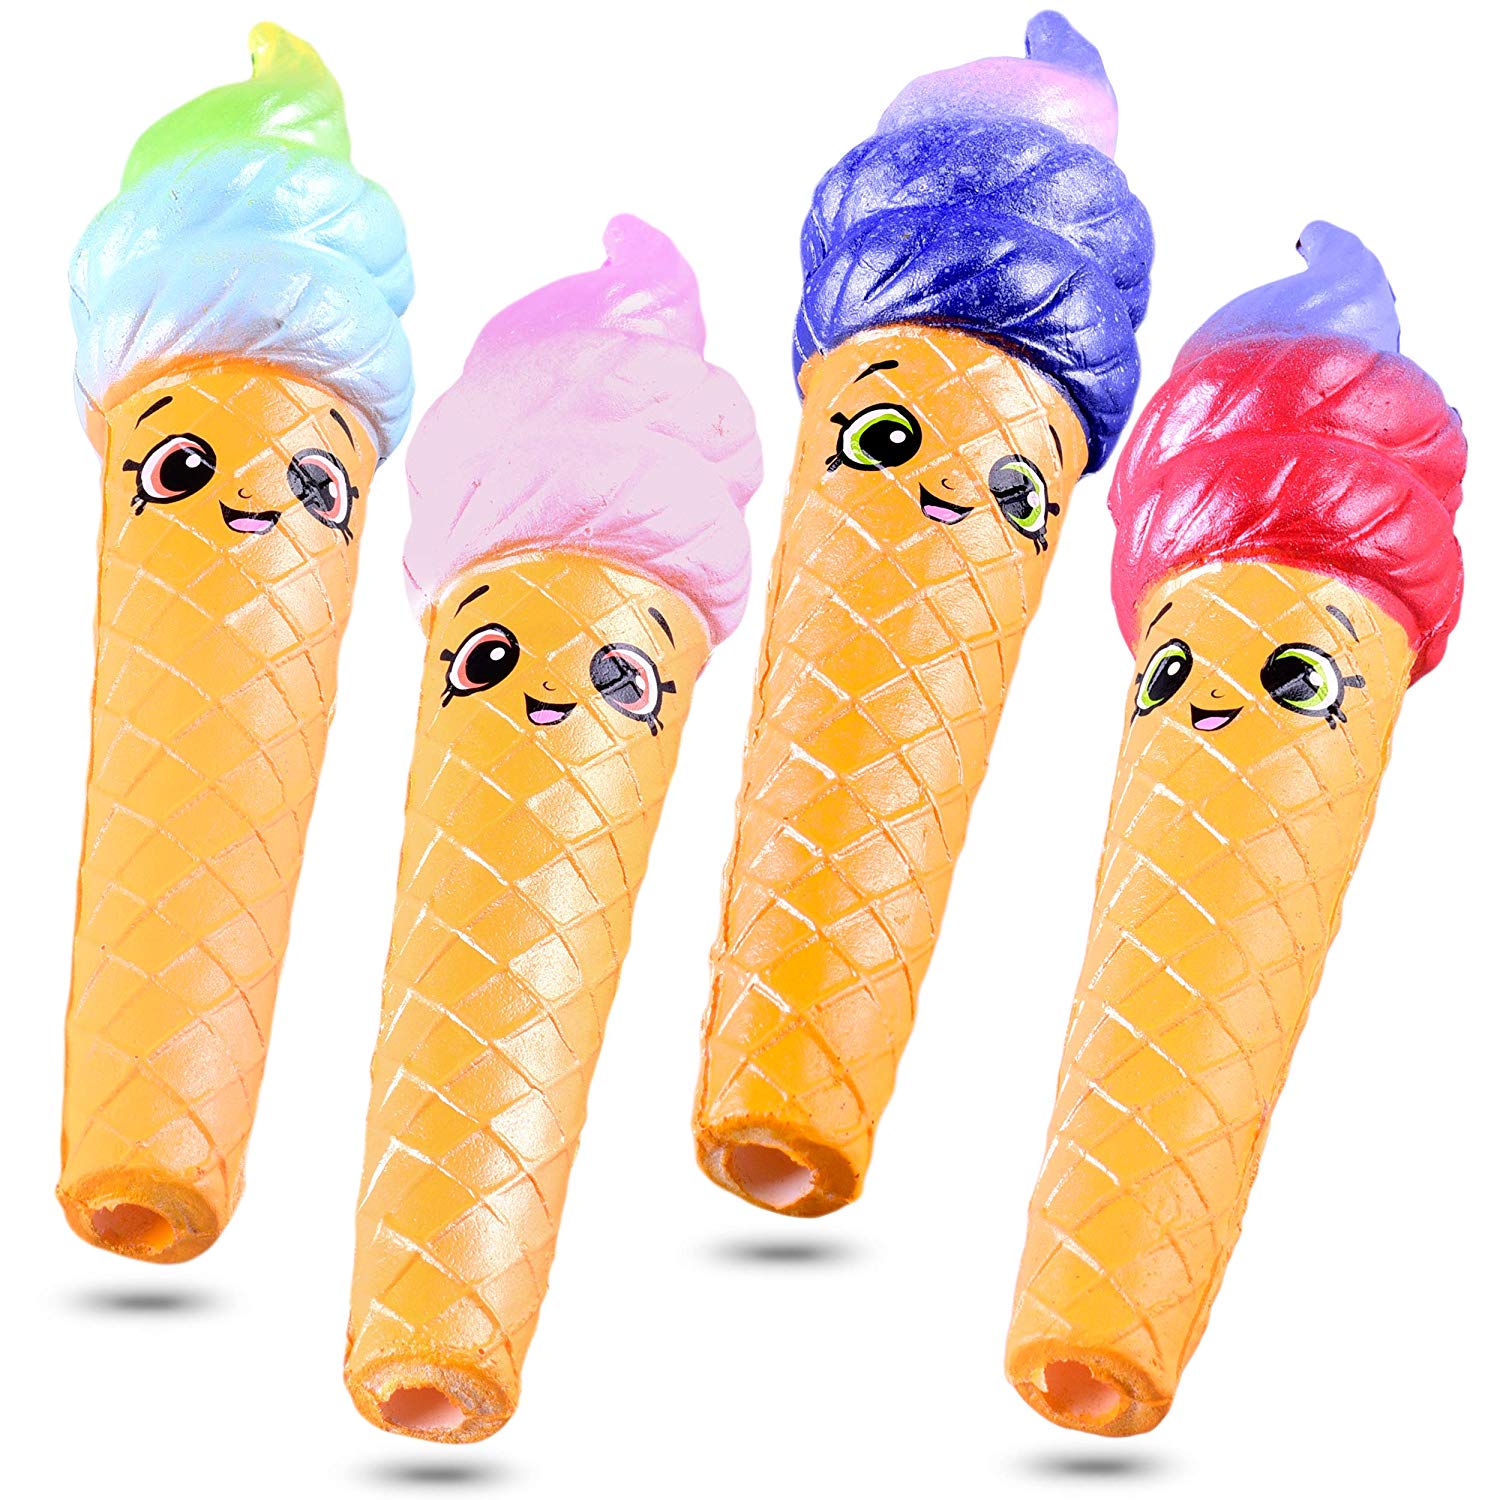 Squishy-Pen-Cap-Smile-Face-Ice-Cream-Cone-Slow-Rising-Jumbo-With-Pen-Stress-Relief-Toys-Student-Offi-1434062-5